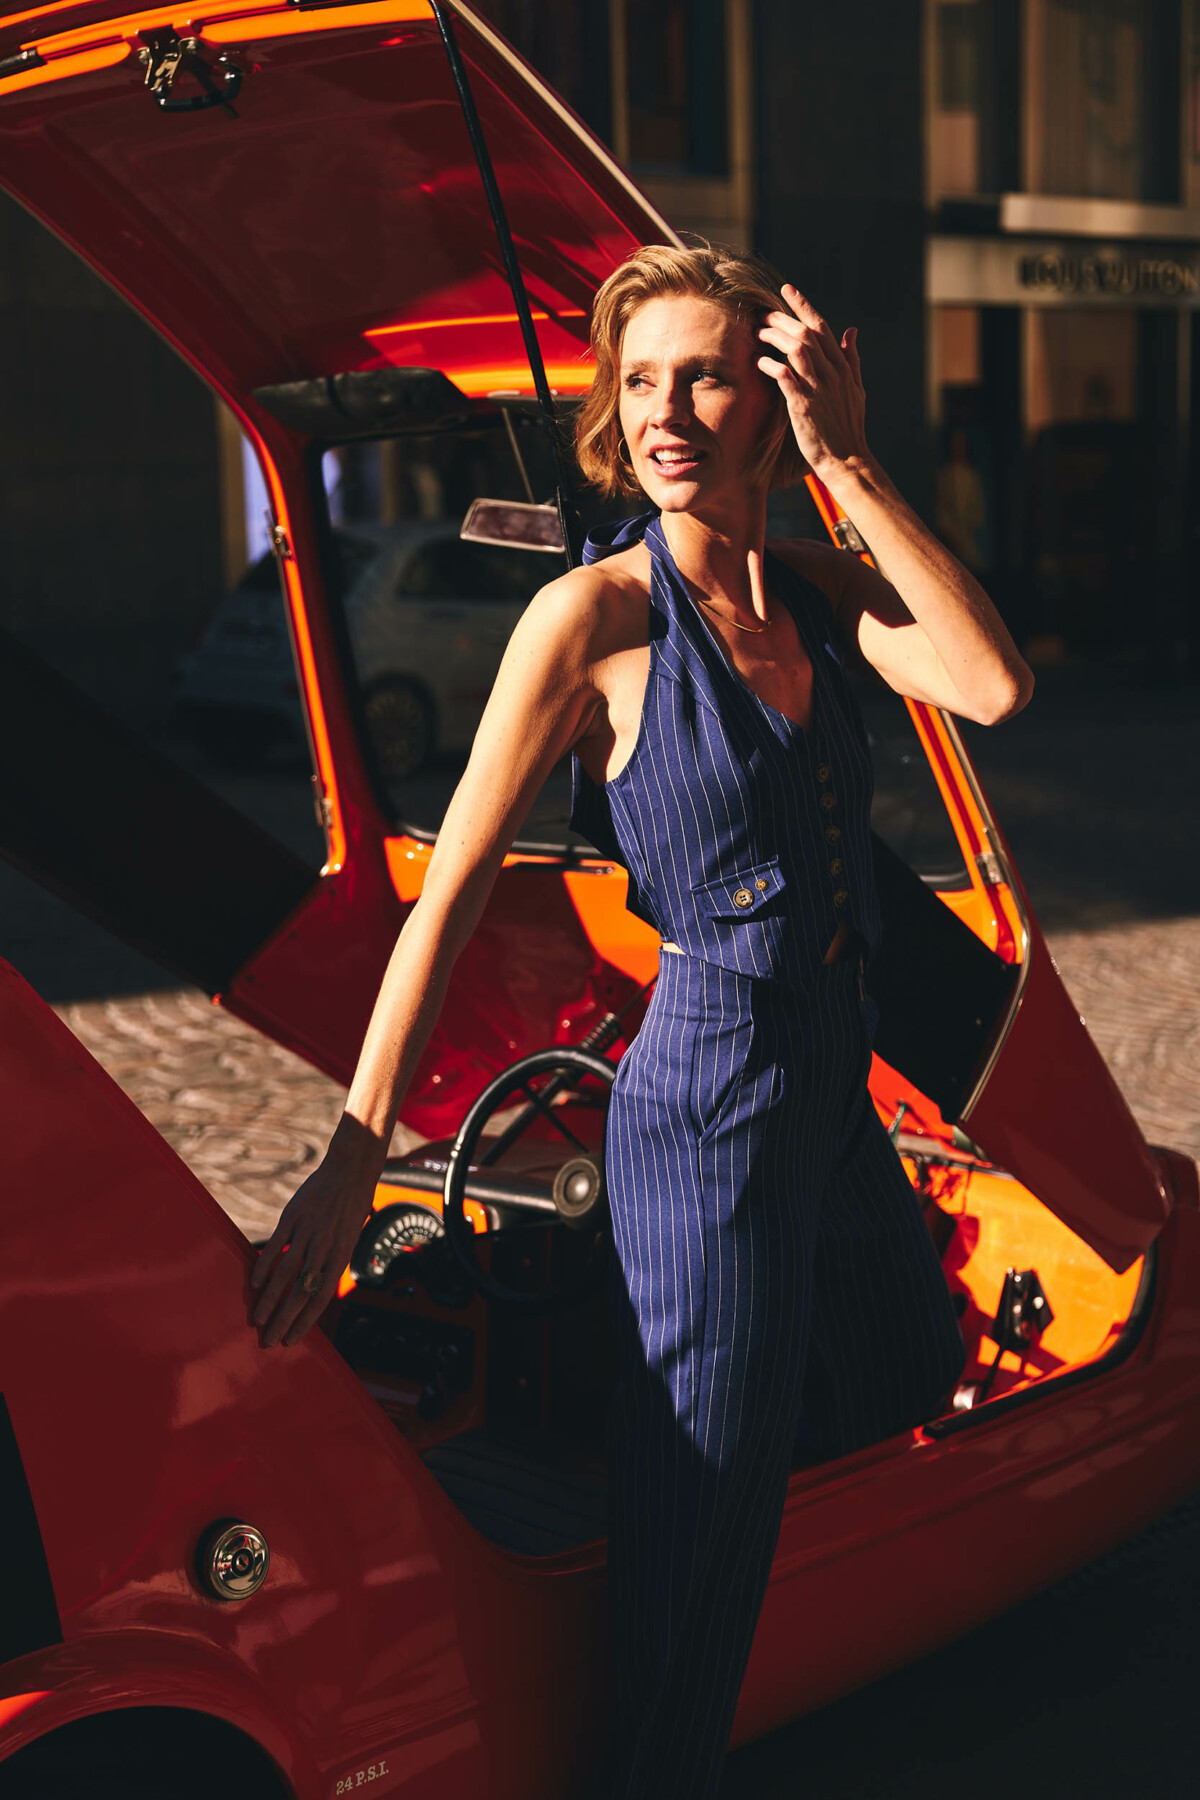 Elegant women getting out of a classic car